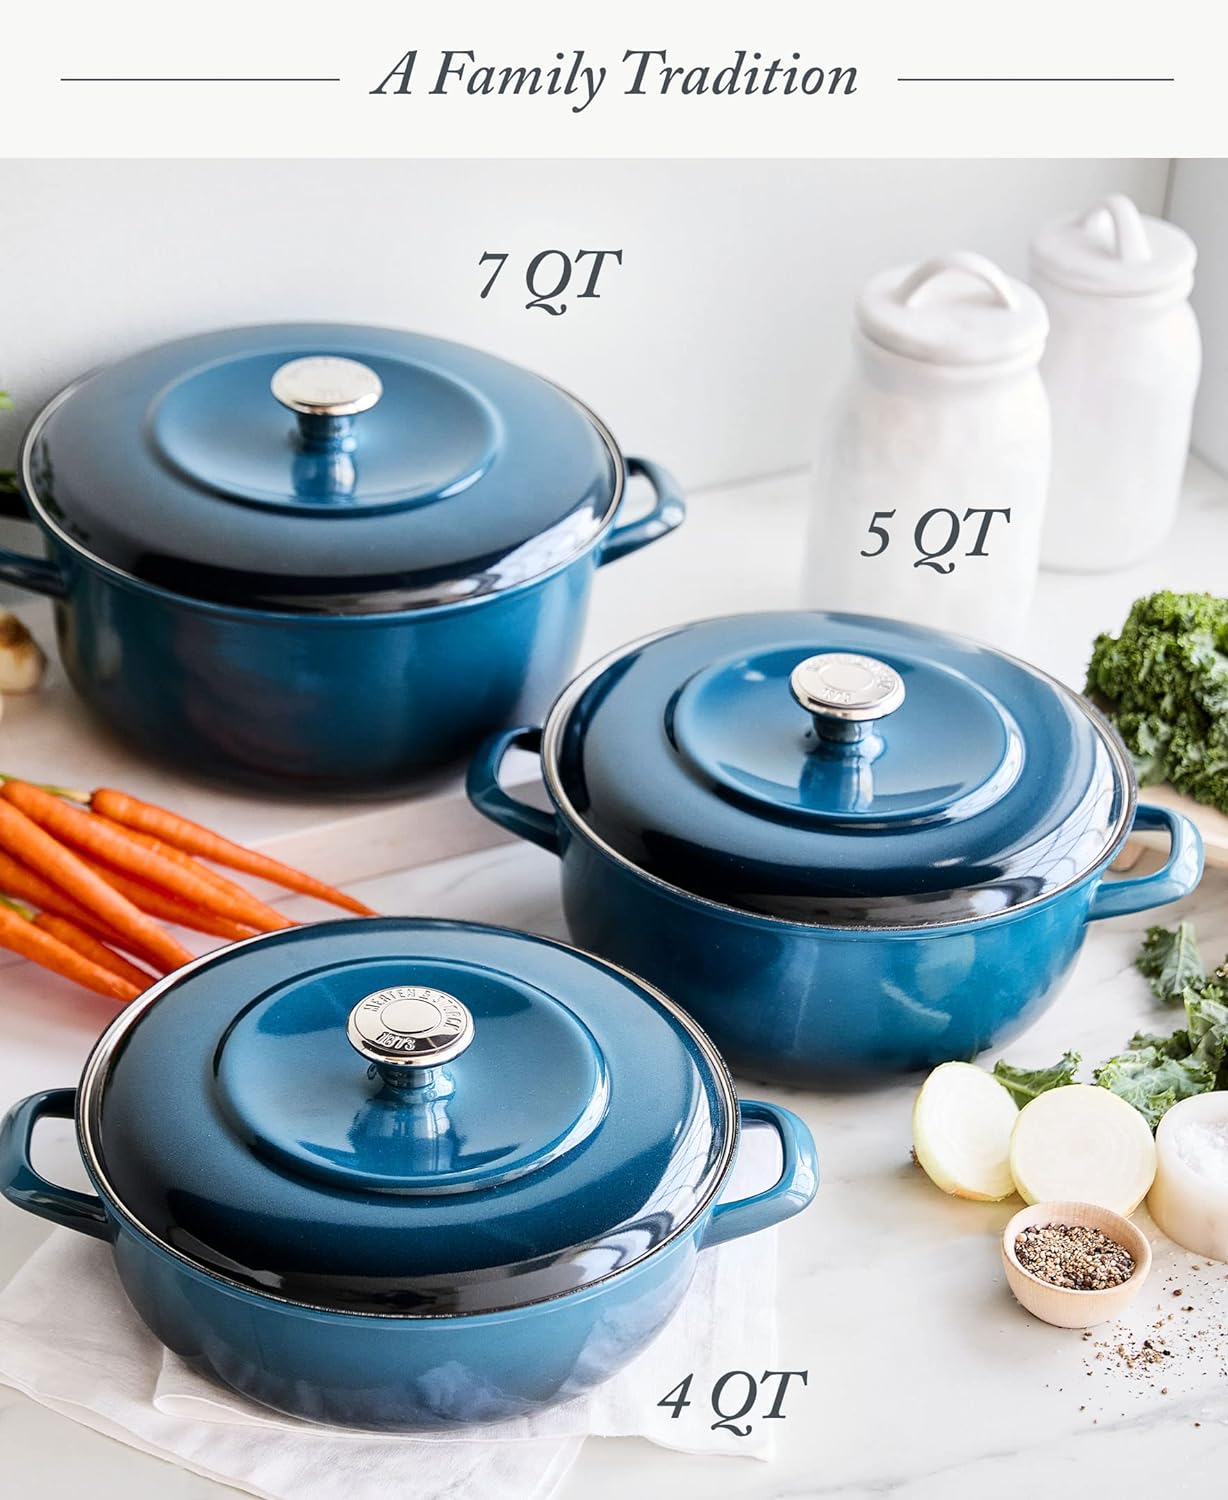 Merten & Storck European Crafted Enameled Iron, Round 7QT Dutch Oven  Casserole with Lid, Aegean Teal